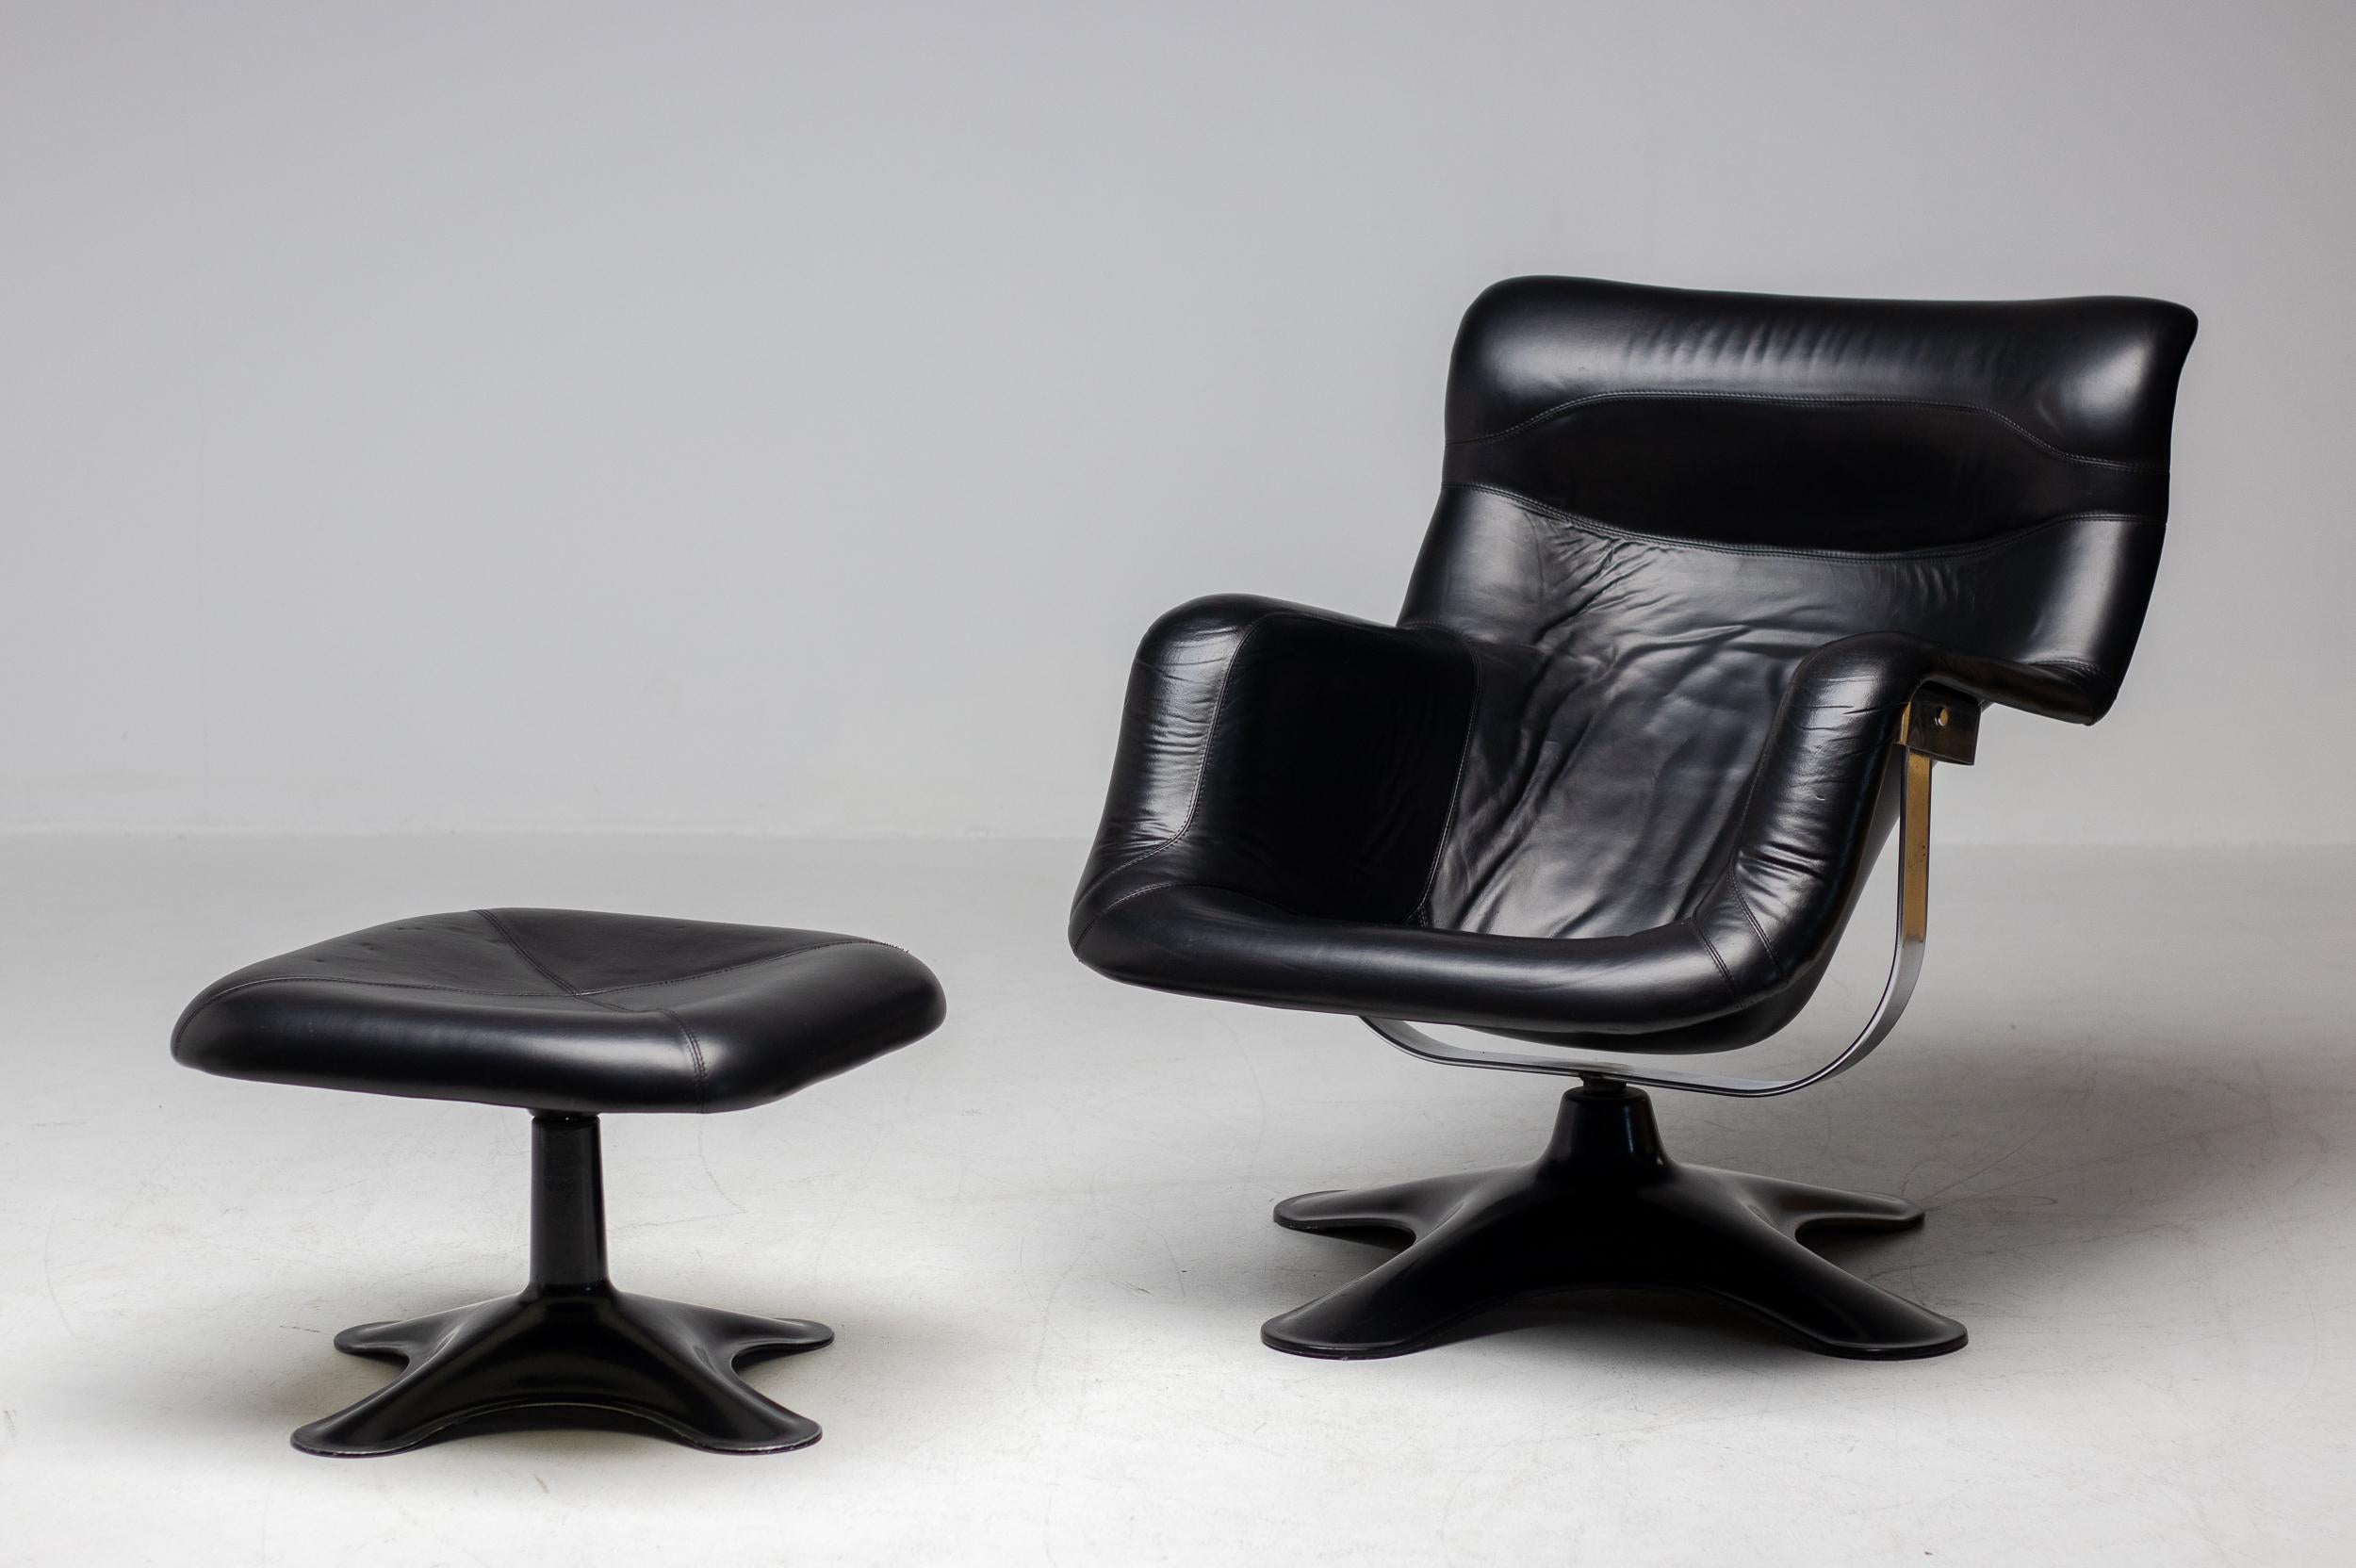 Wonderful vintage 1960s version of this iconic Scandinavian Classic with rare matching swiveling ottoman.
Arguably the most comfortable, futuristic and elegant chair created in the 1960s.
This set is in remarkable vintage condition.
Marked with